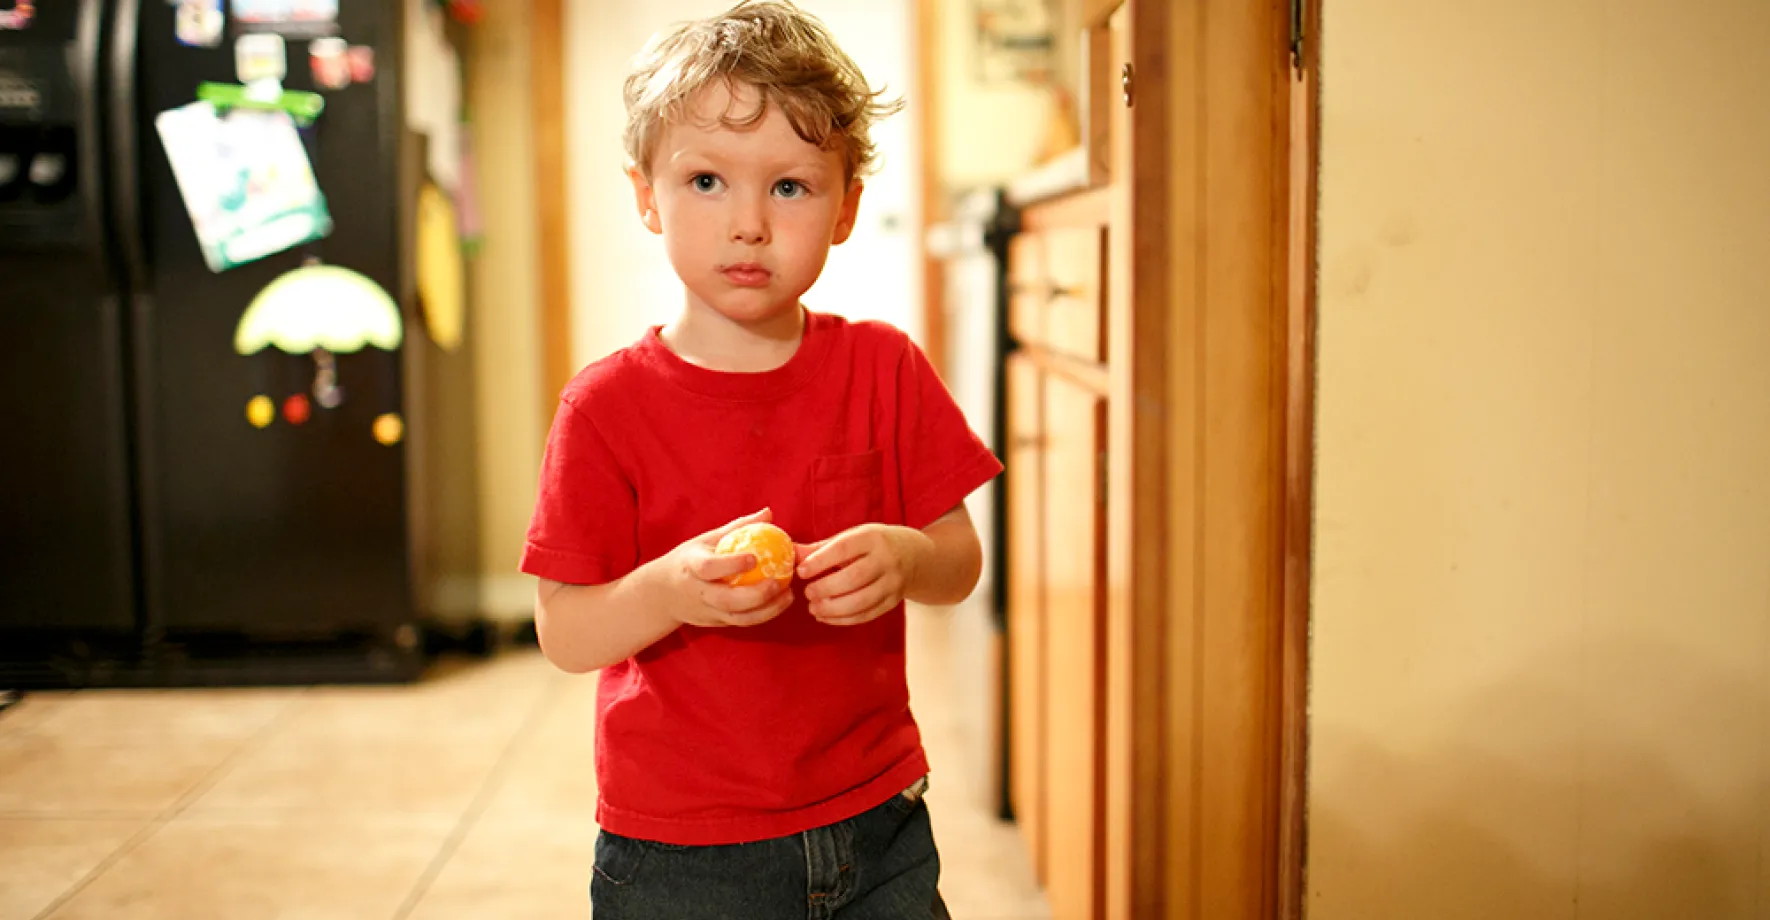 A little boy with a sad look on his face stands in his kitchen